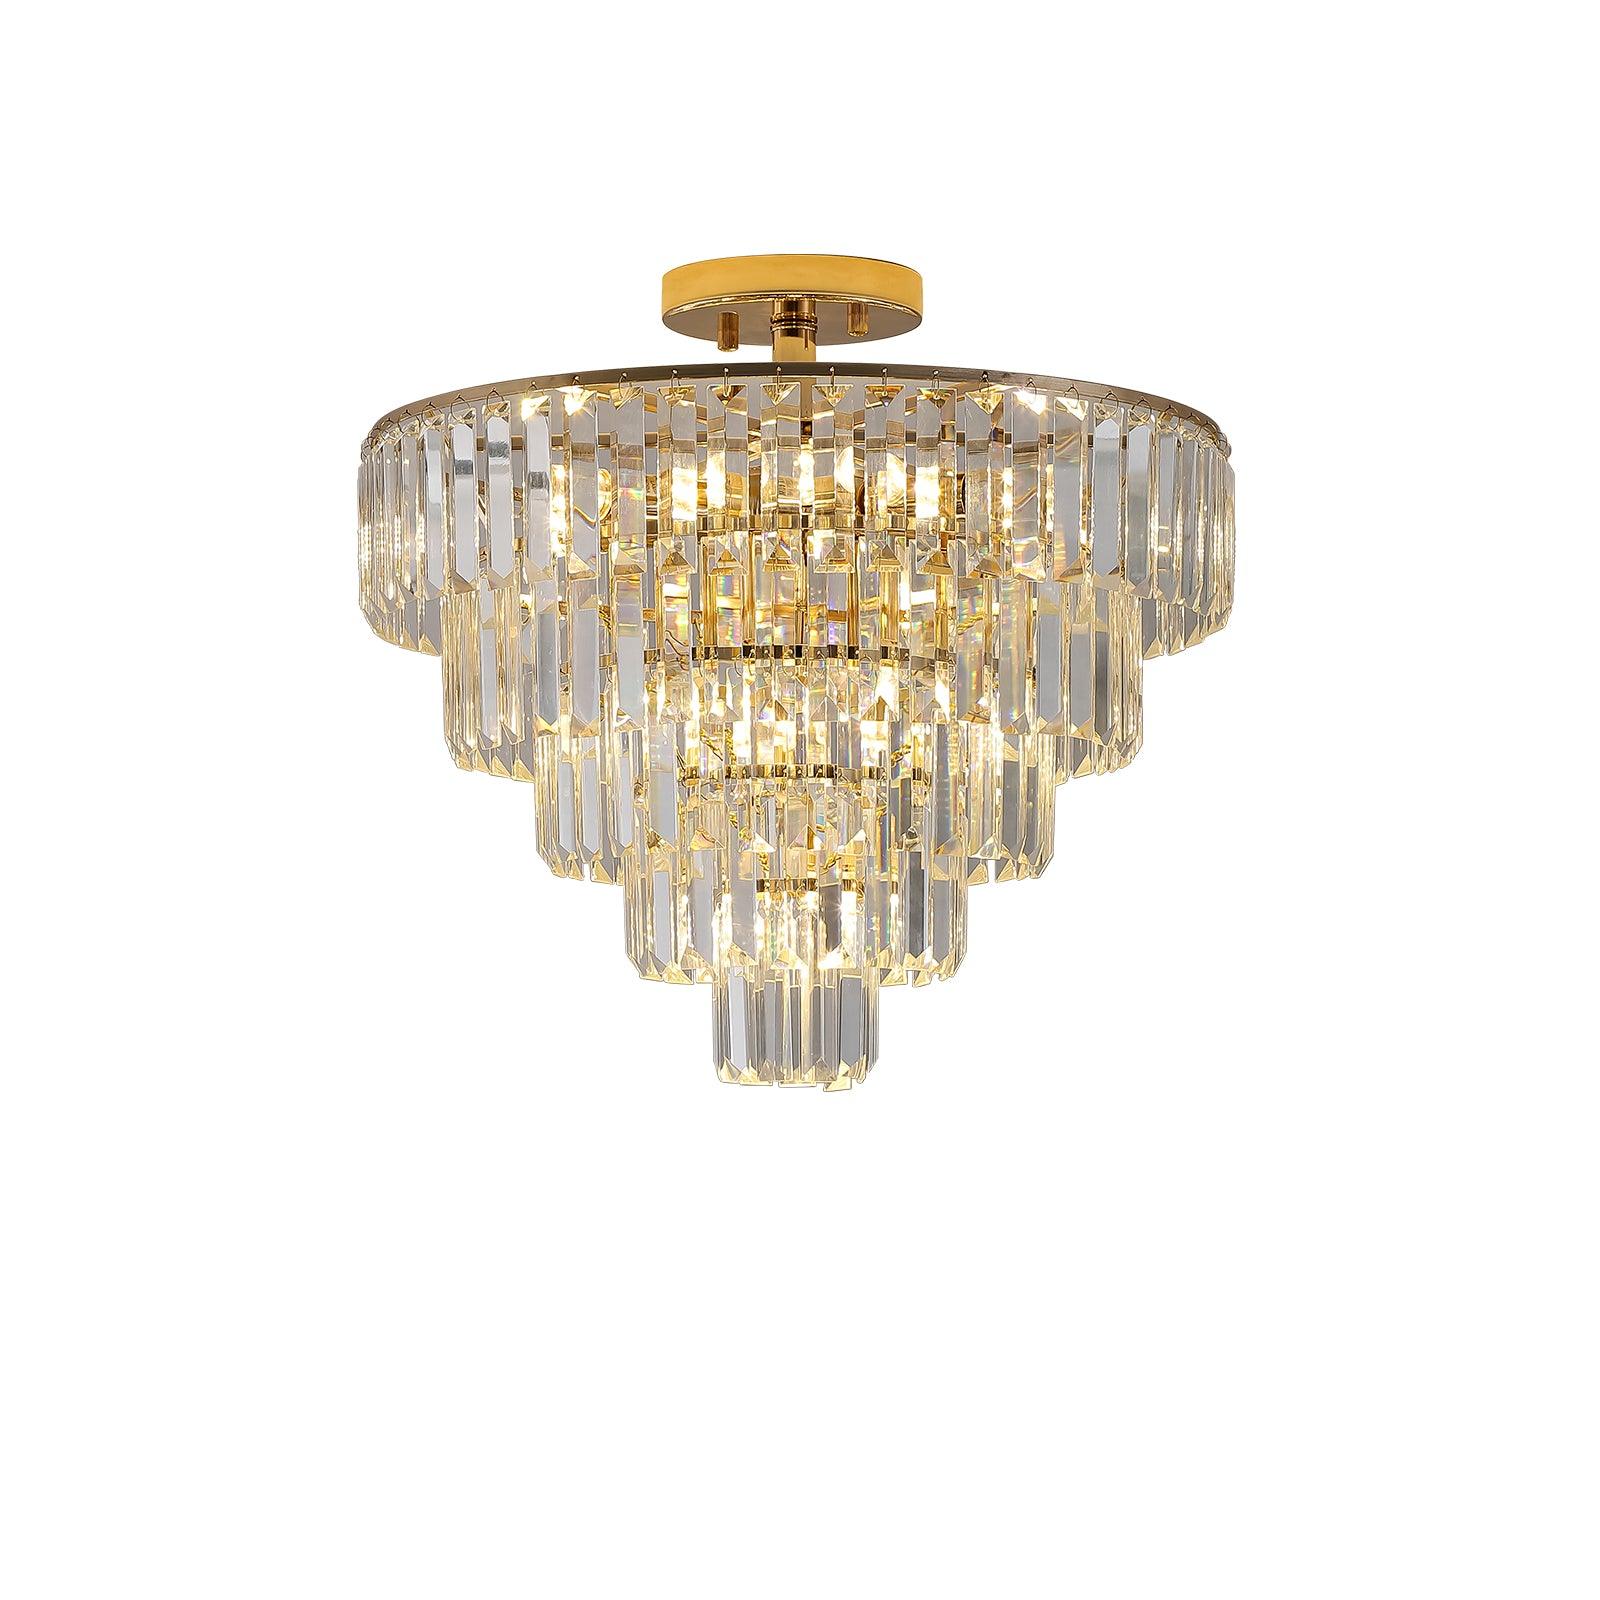 Gold Crystal Chandeliers,5-Tier Round Semi Flush Mount Chandelier Light Fixture,Large Contemporary Luxury Ceiling Lighting - FurniFindUSA